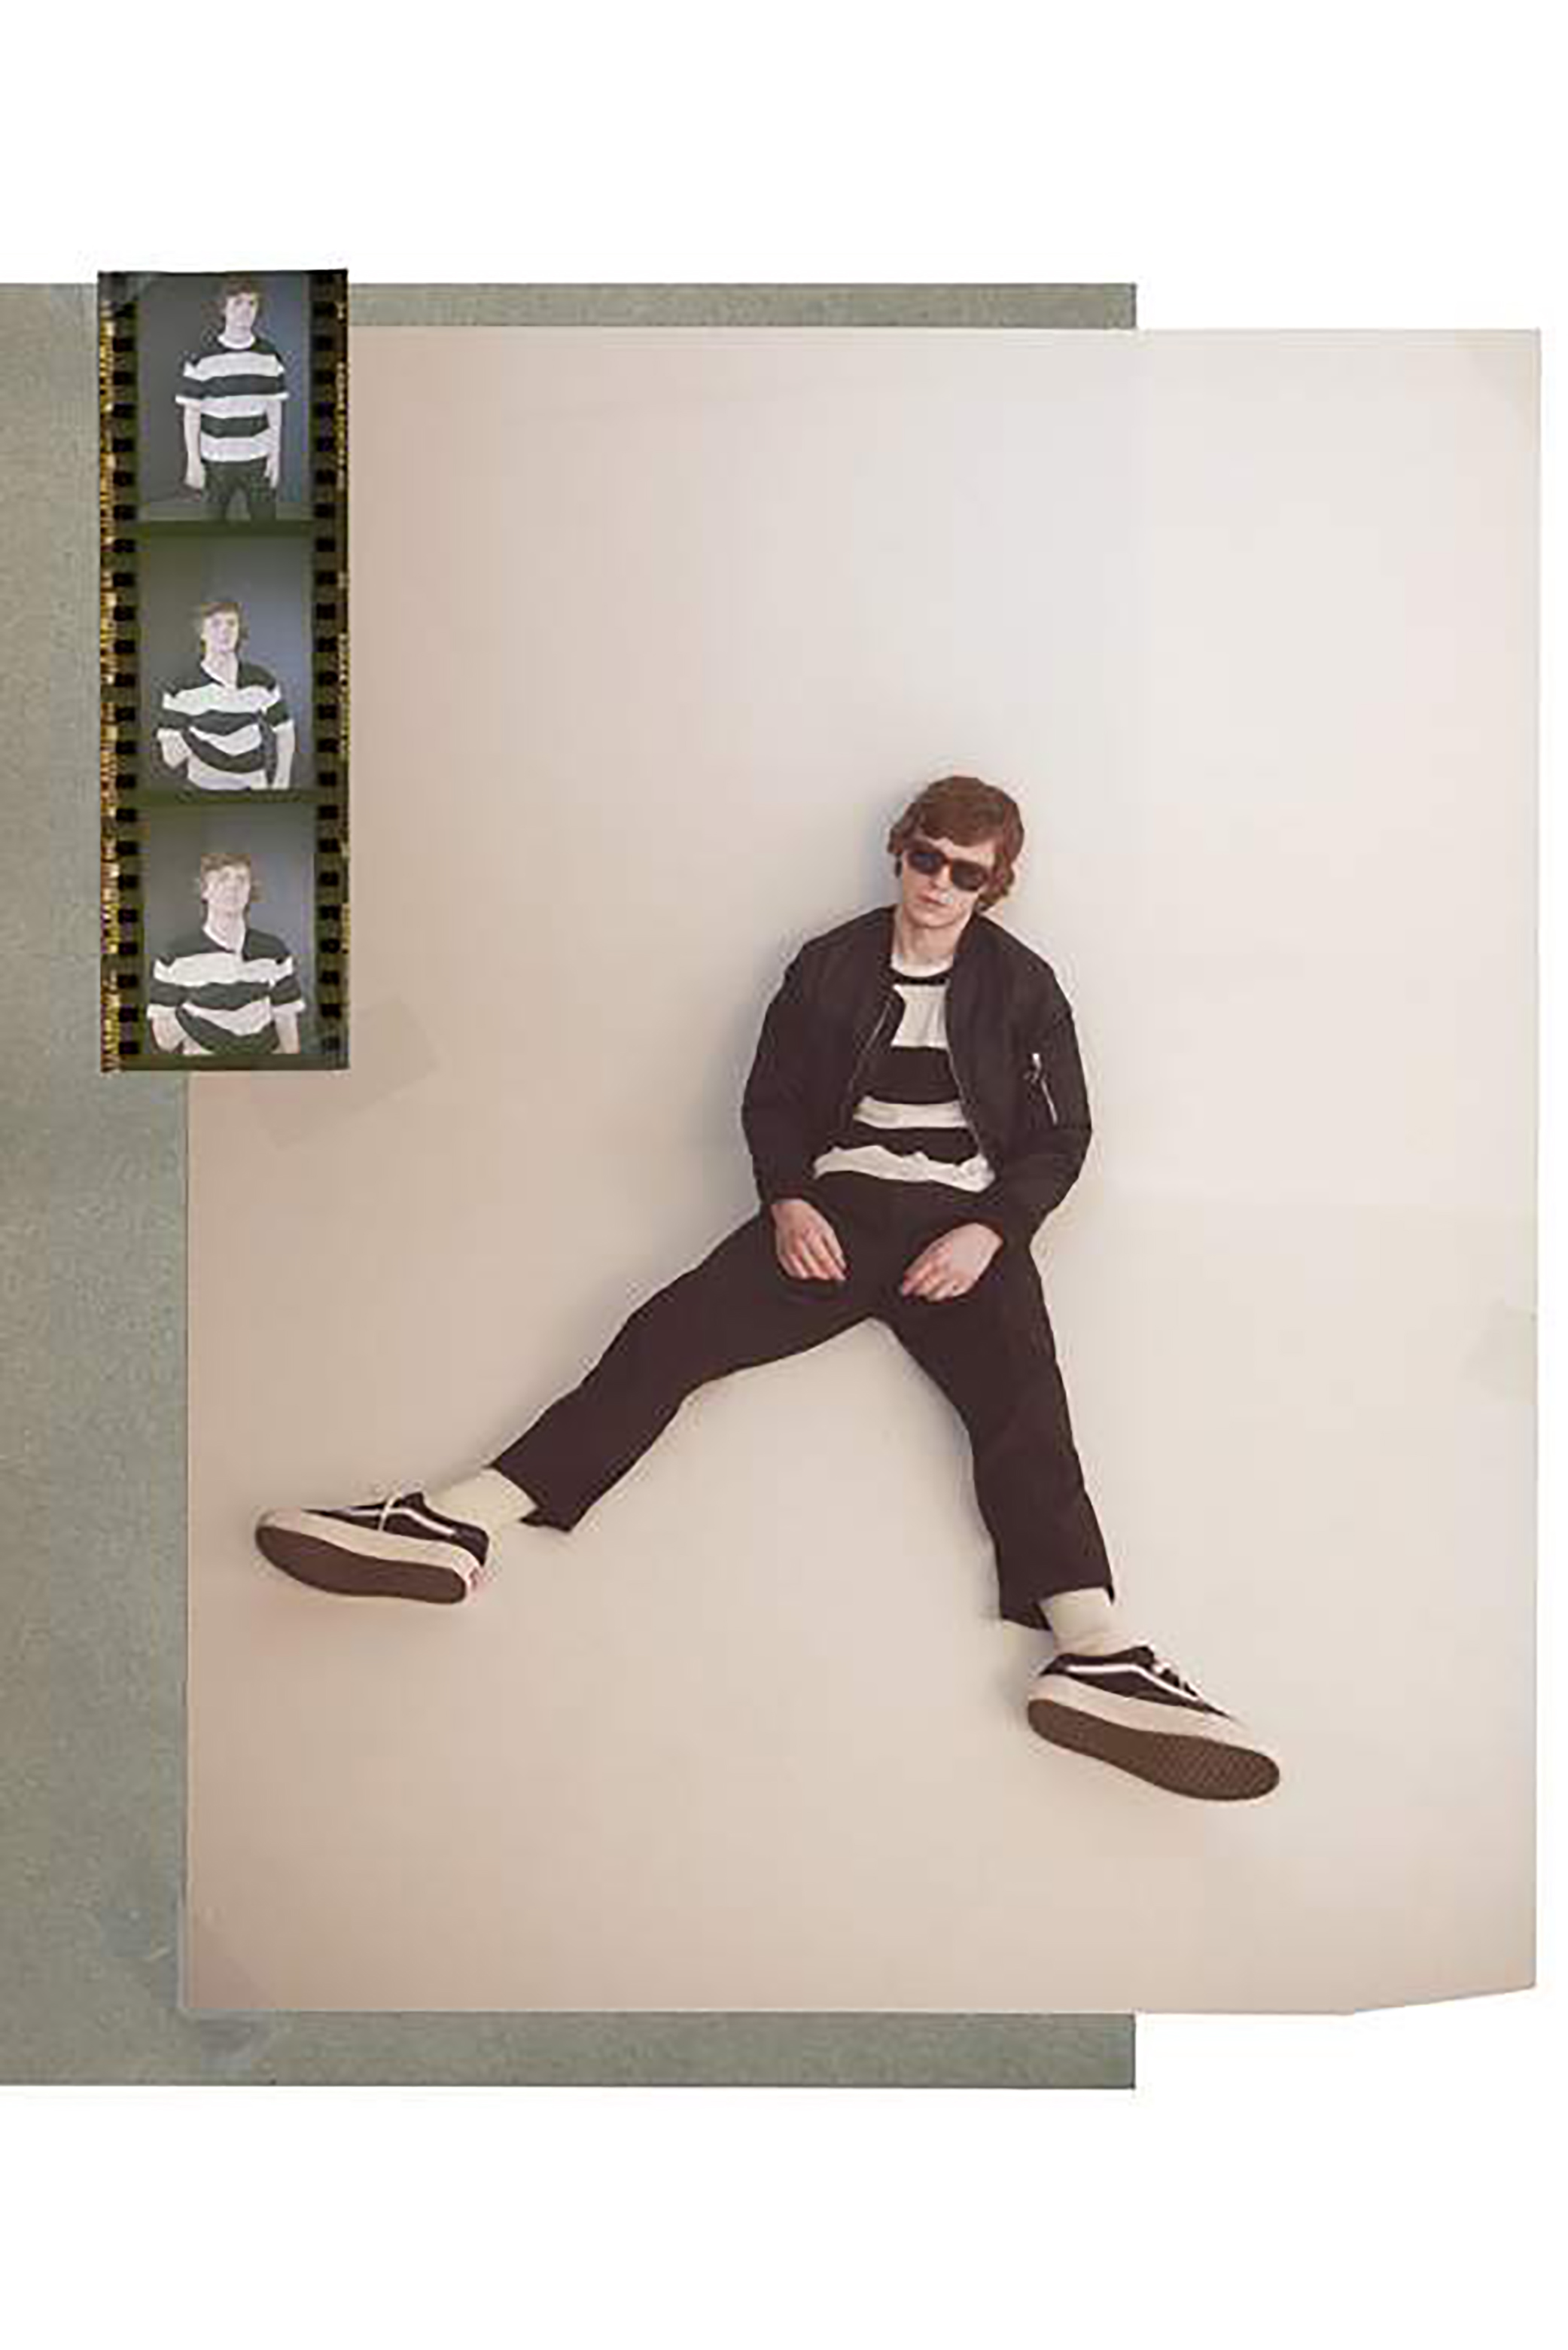 evan-peters-opens-up-about-his-role-in-pose-05.jpg